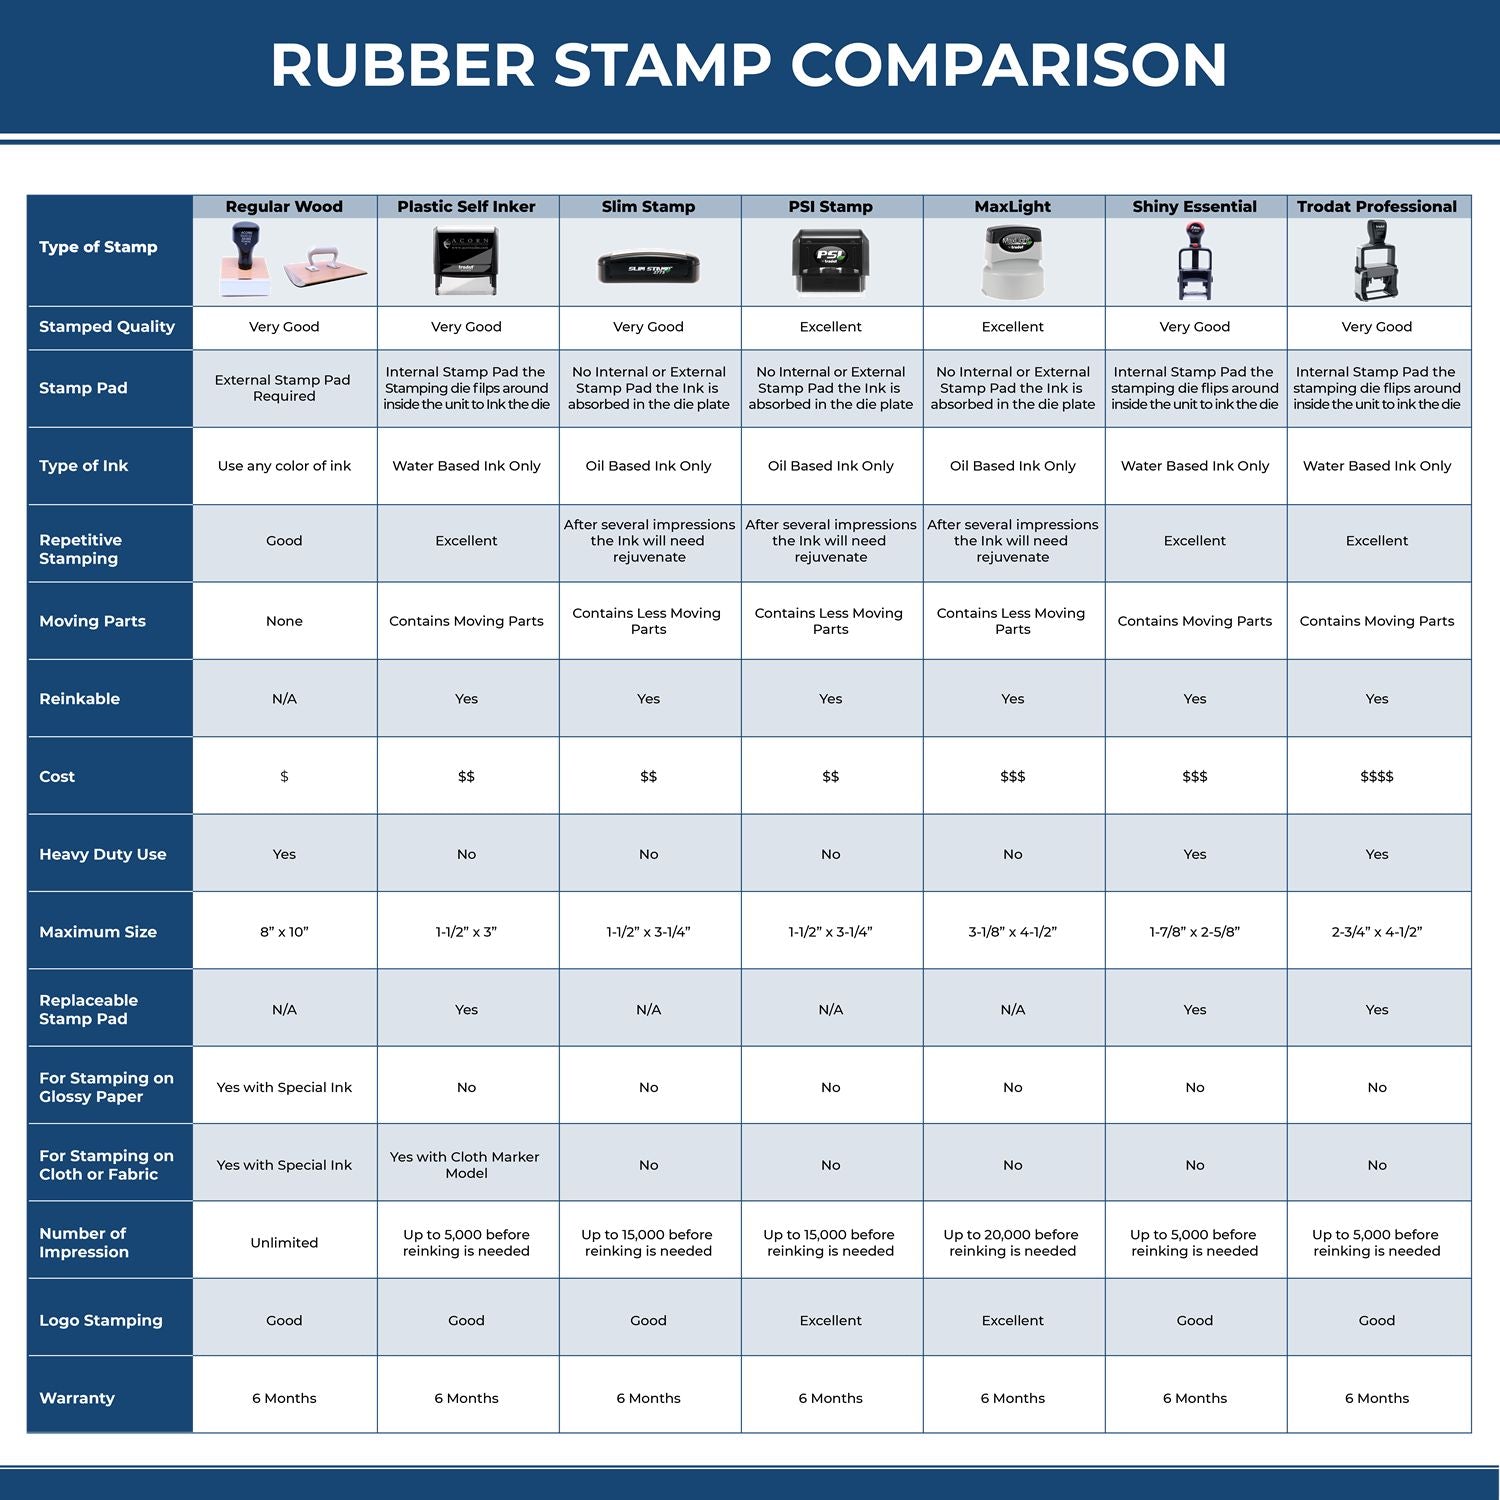 A comparison chart for the different types of mount models available for the Premium MaxLight Pre-Inked Delaware Engineering Stamp.